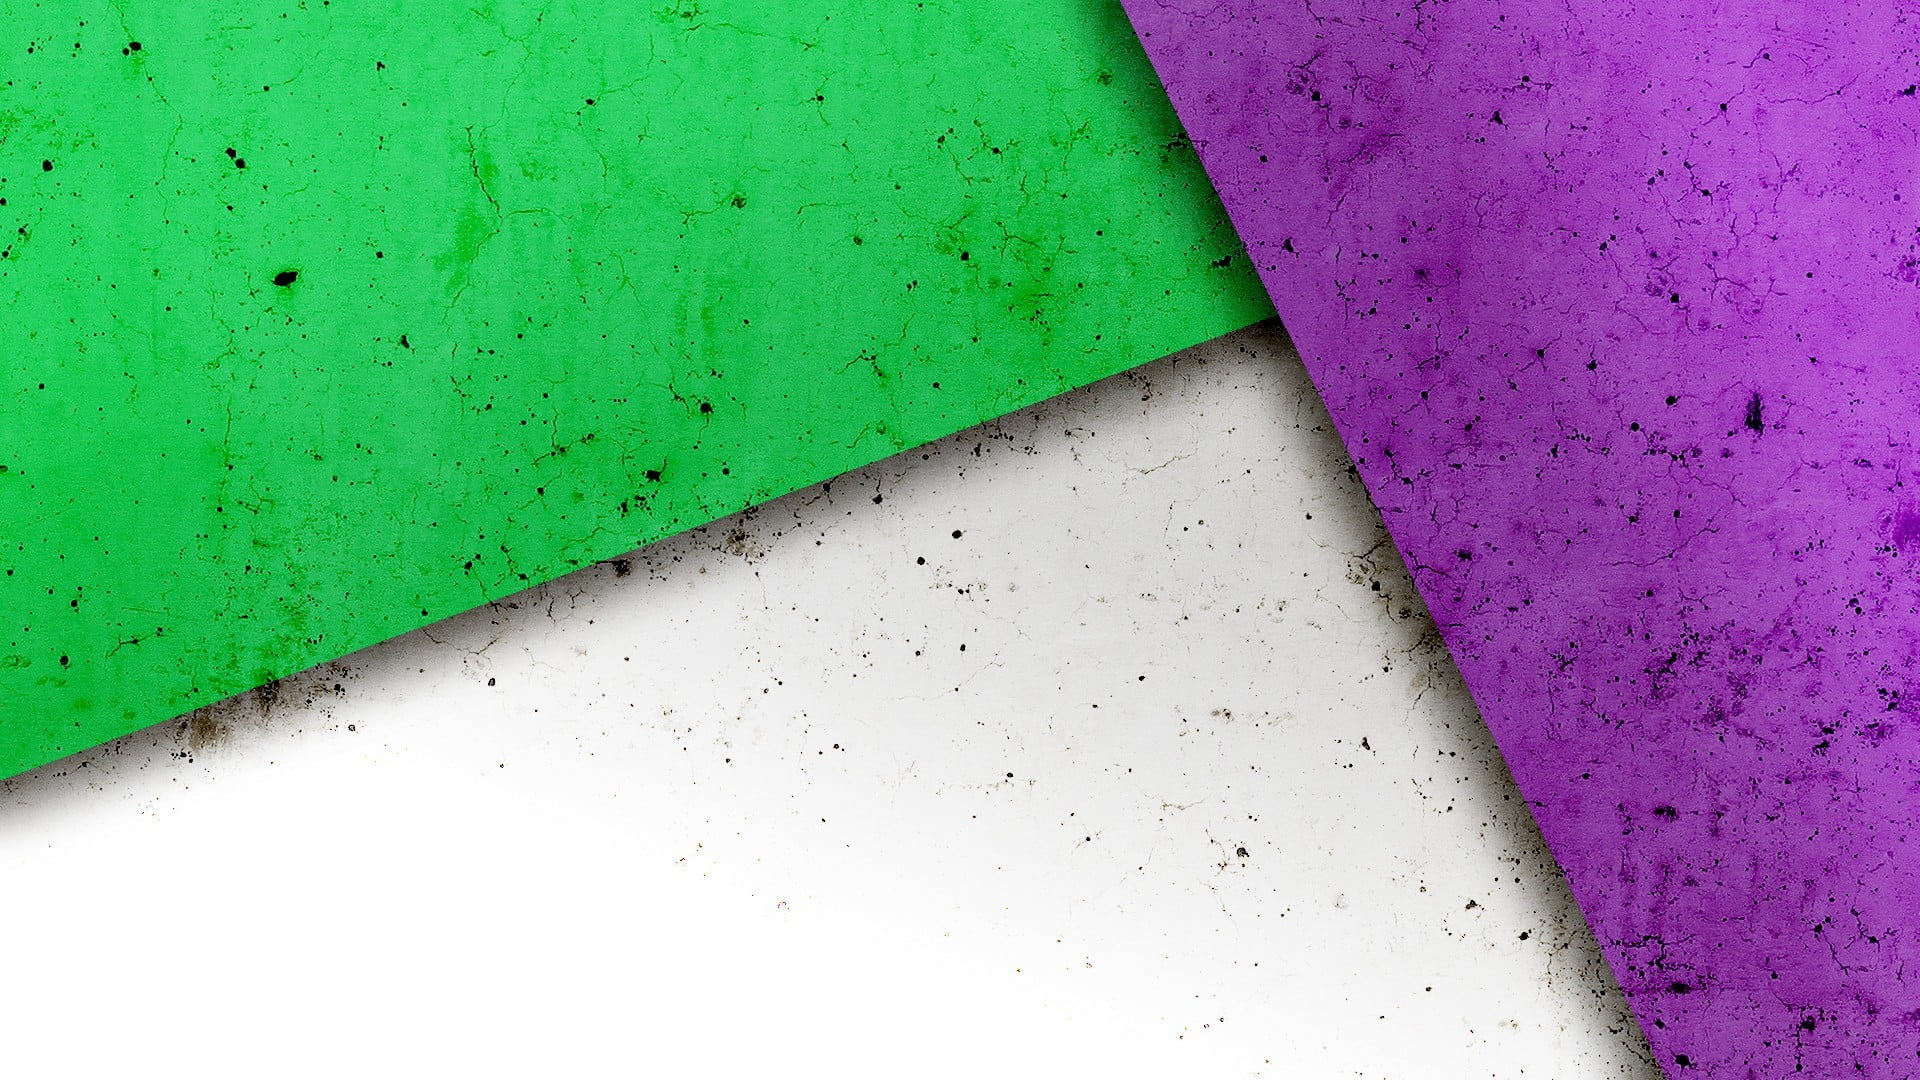 green, purple, and white artwork, simple background, textured, texture, abstract